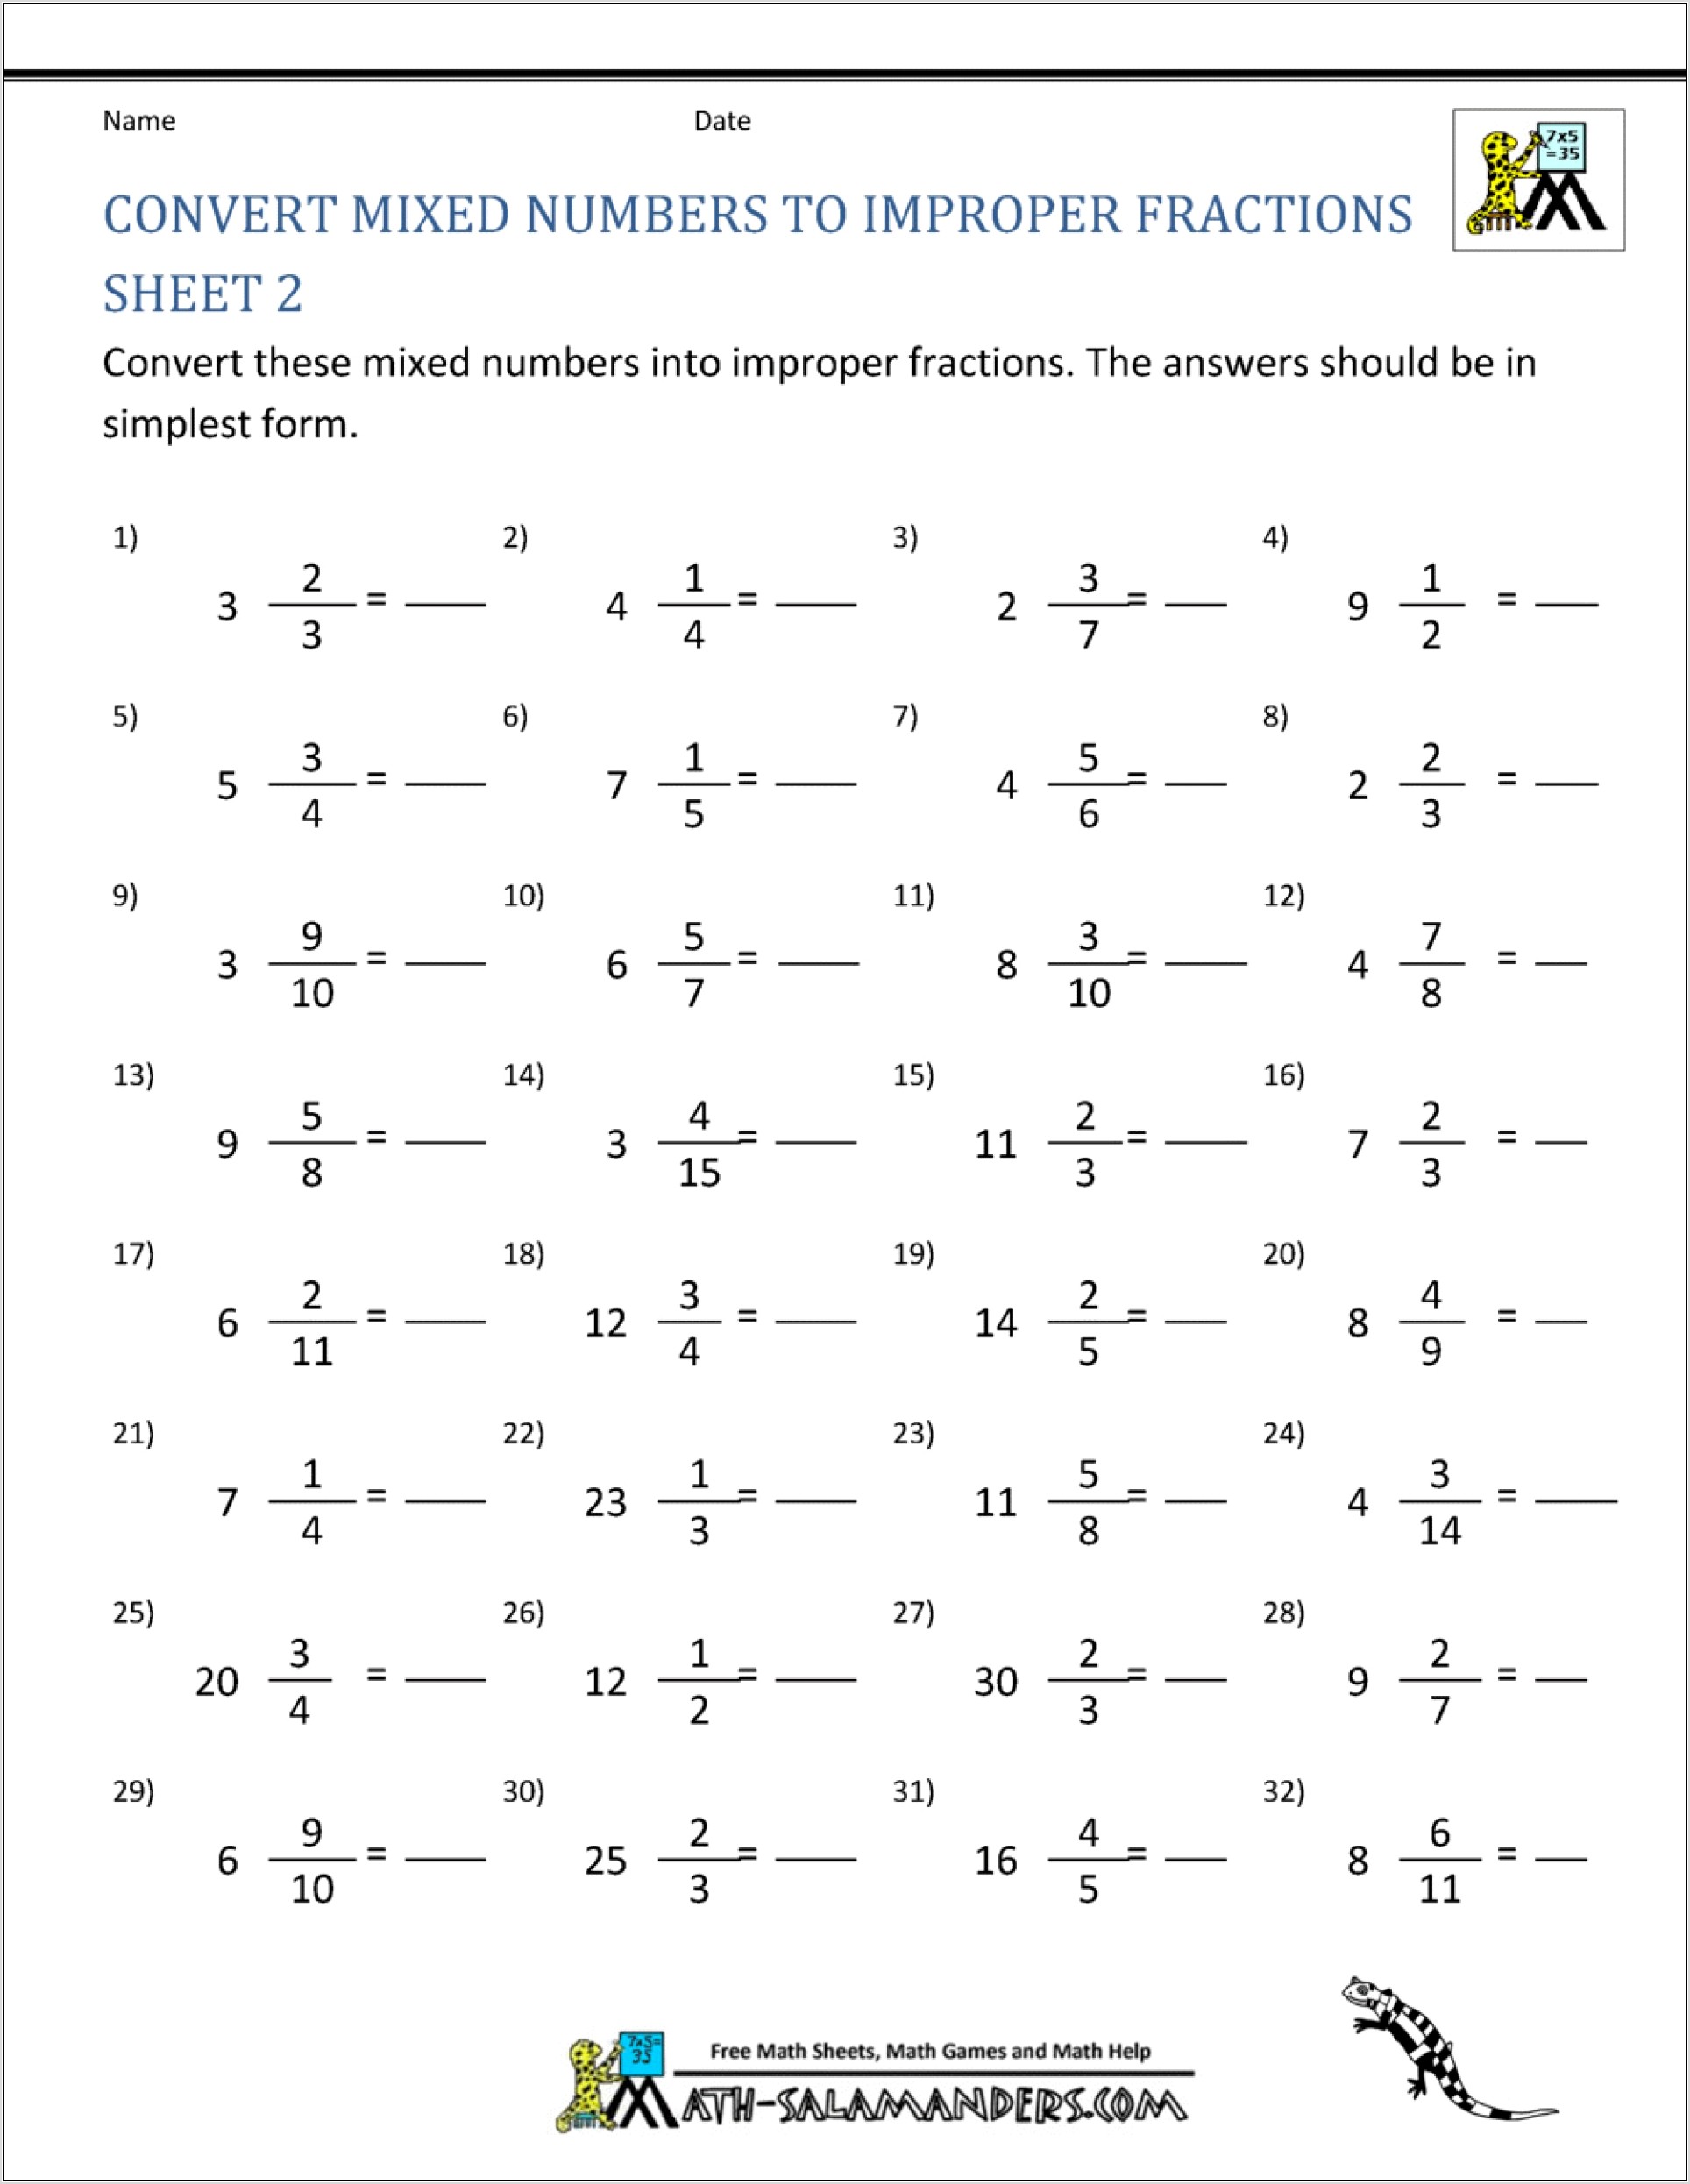 Printable Worksheet Improper Fractions To Mixed Numbers